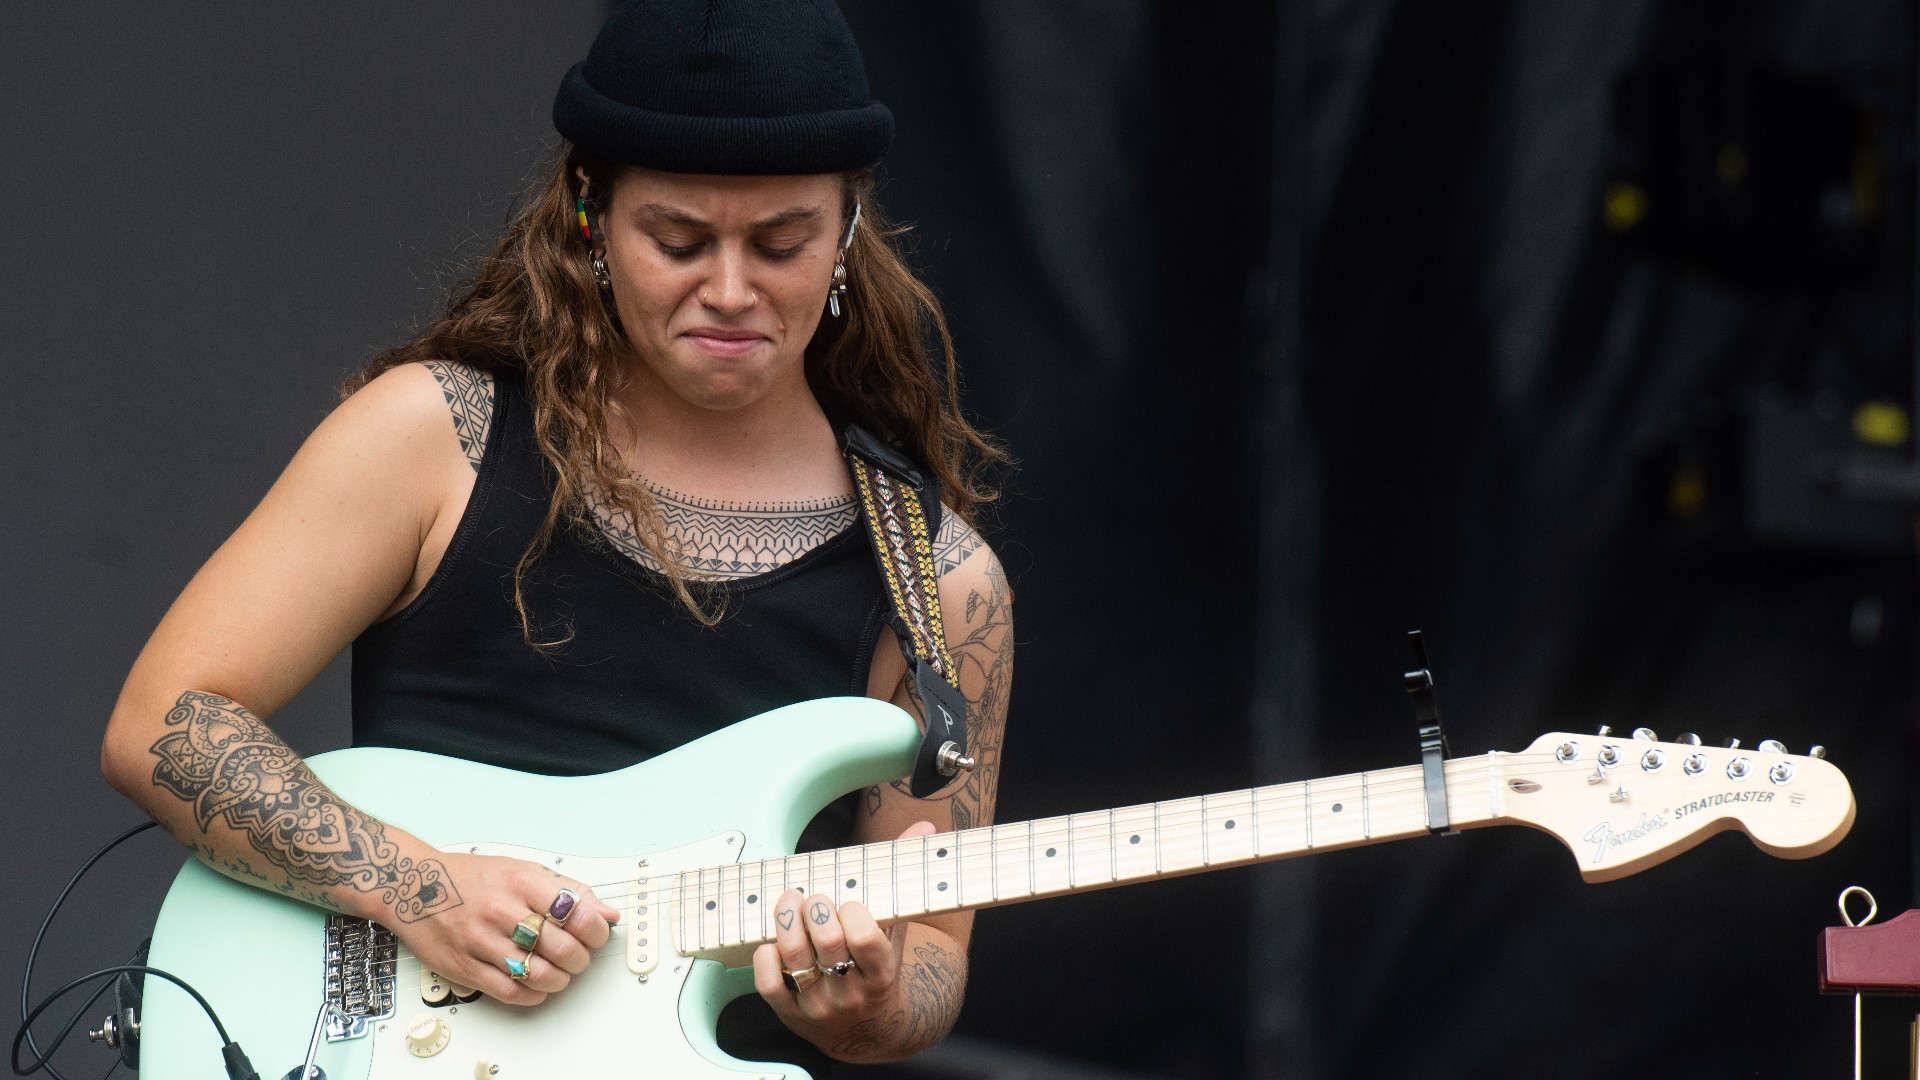 Tash Sultana announces US tour date at Red Rocks in Colorado